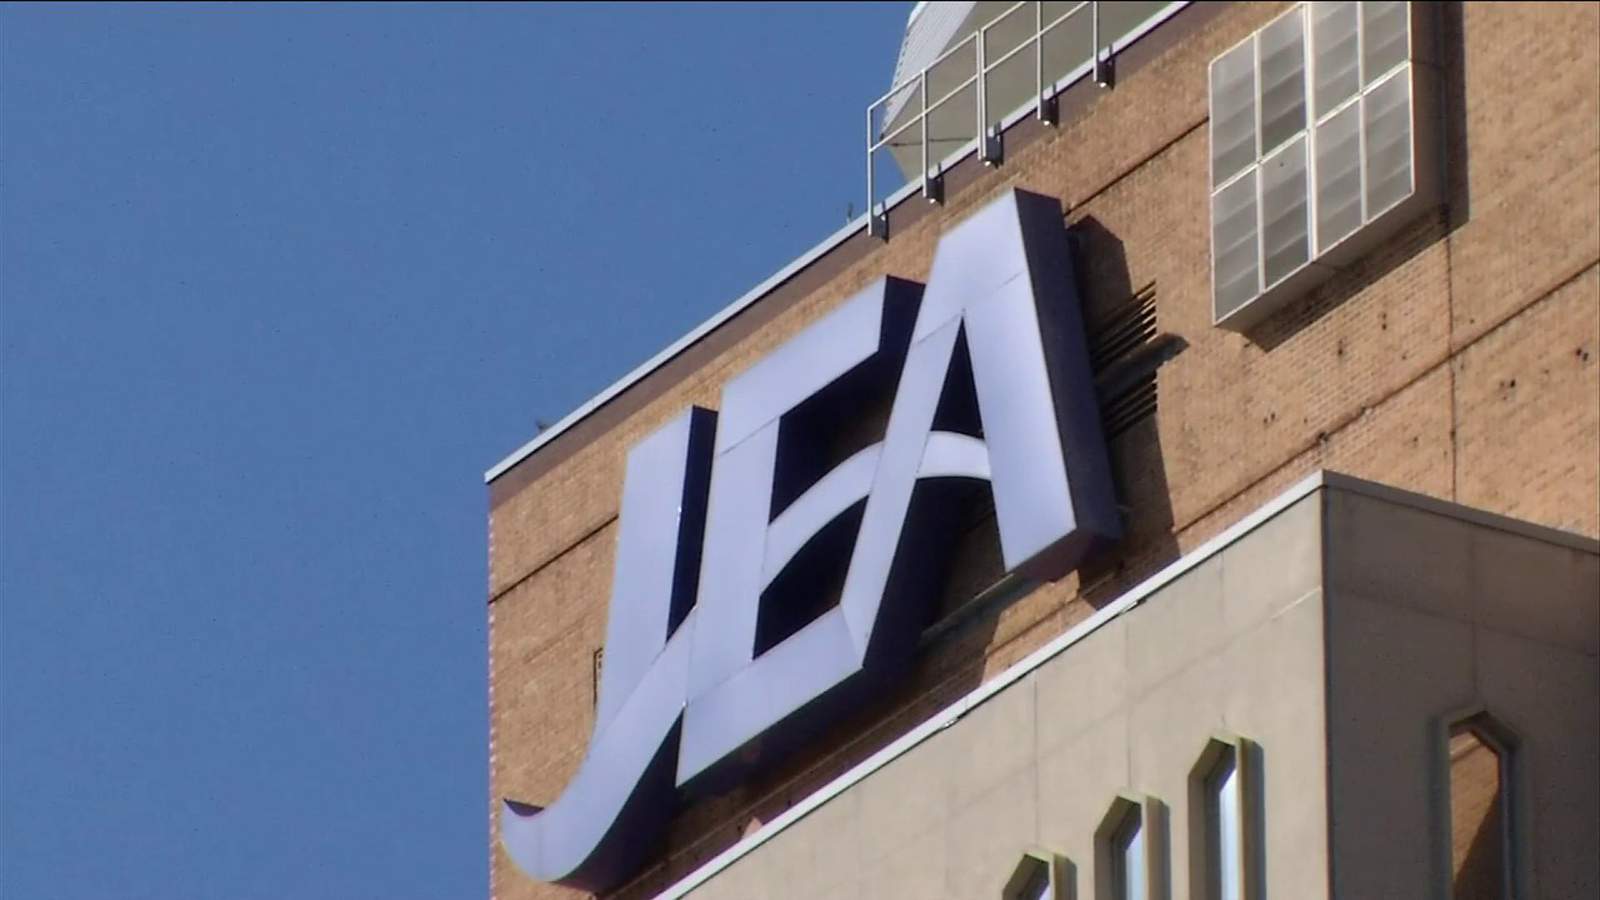 JEA committee votes to once again subpoena Tim Baker